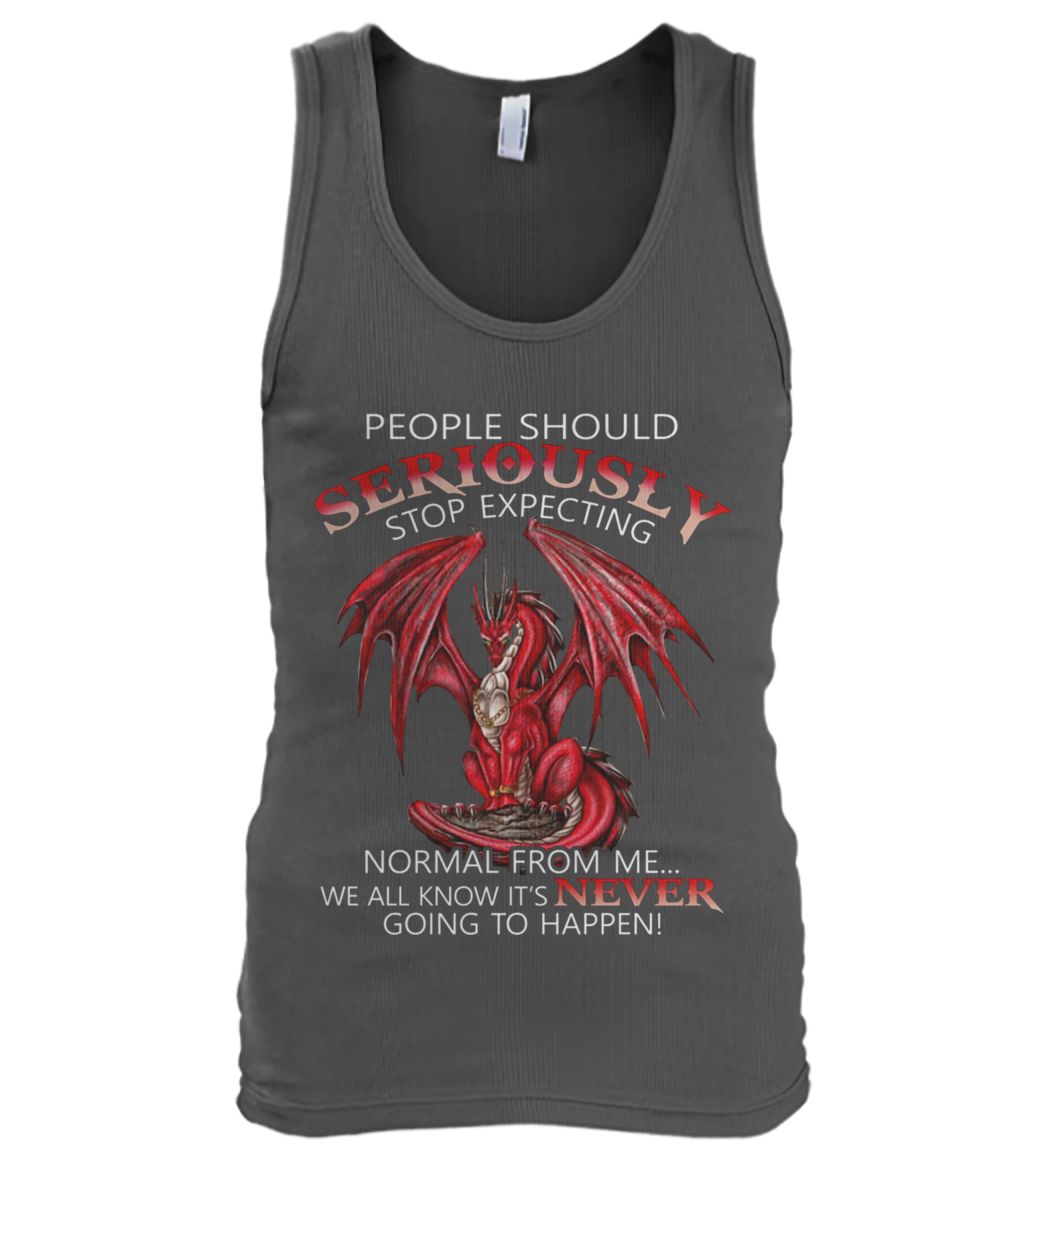 People should seriously stop expecting normal from me red dragon men's tank top